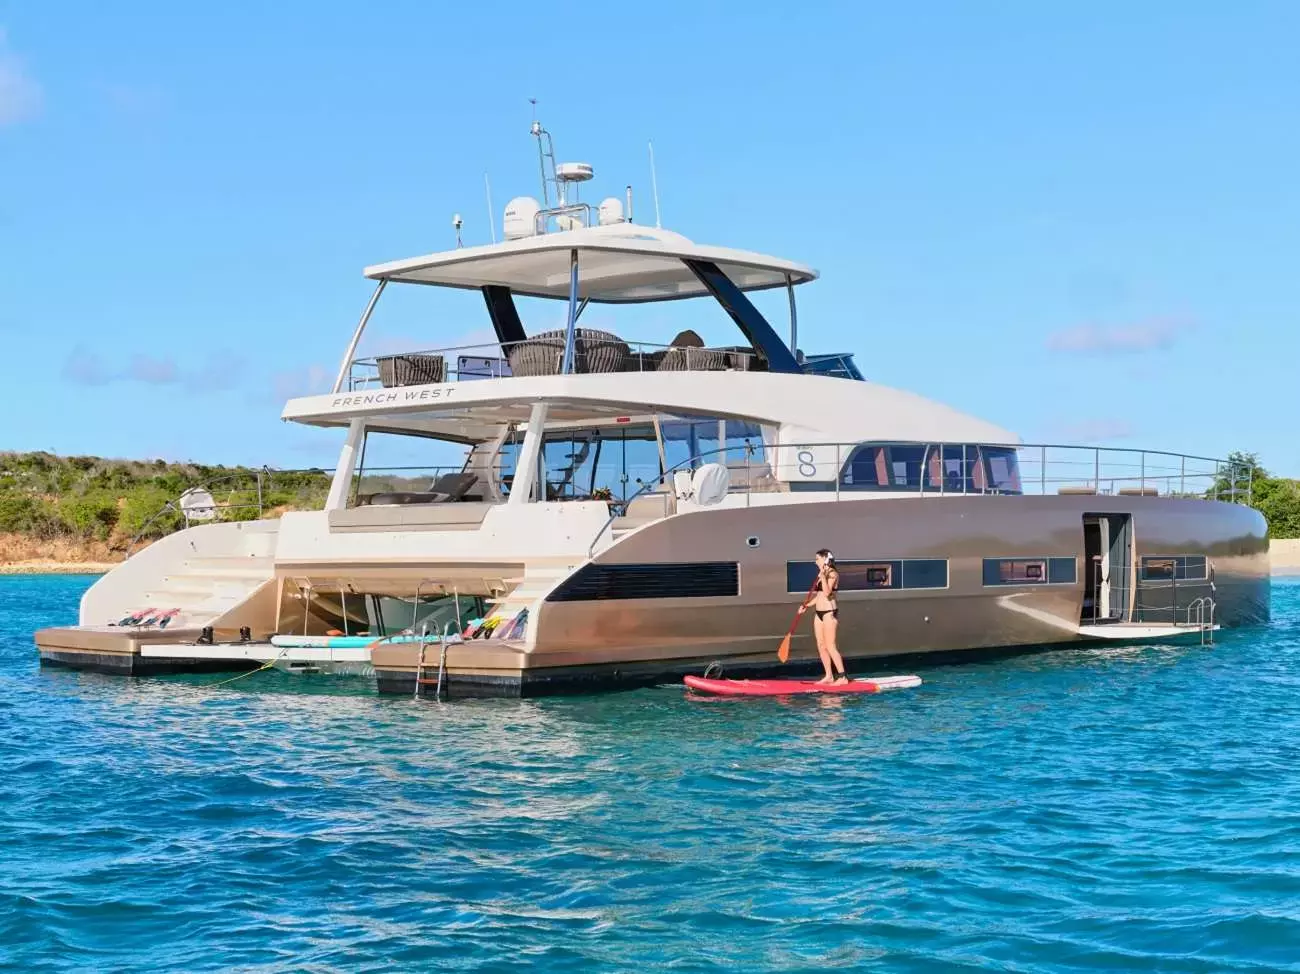 Frenchwest by Lagoon - Top rates for a Rental of a private Power Catamaran in St Barths